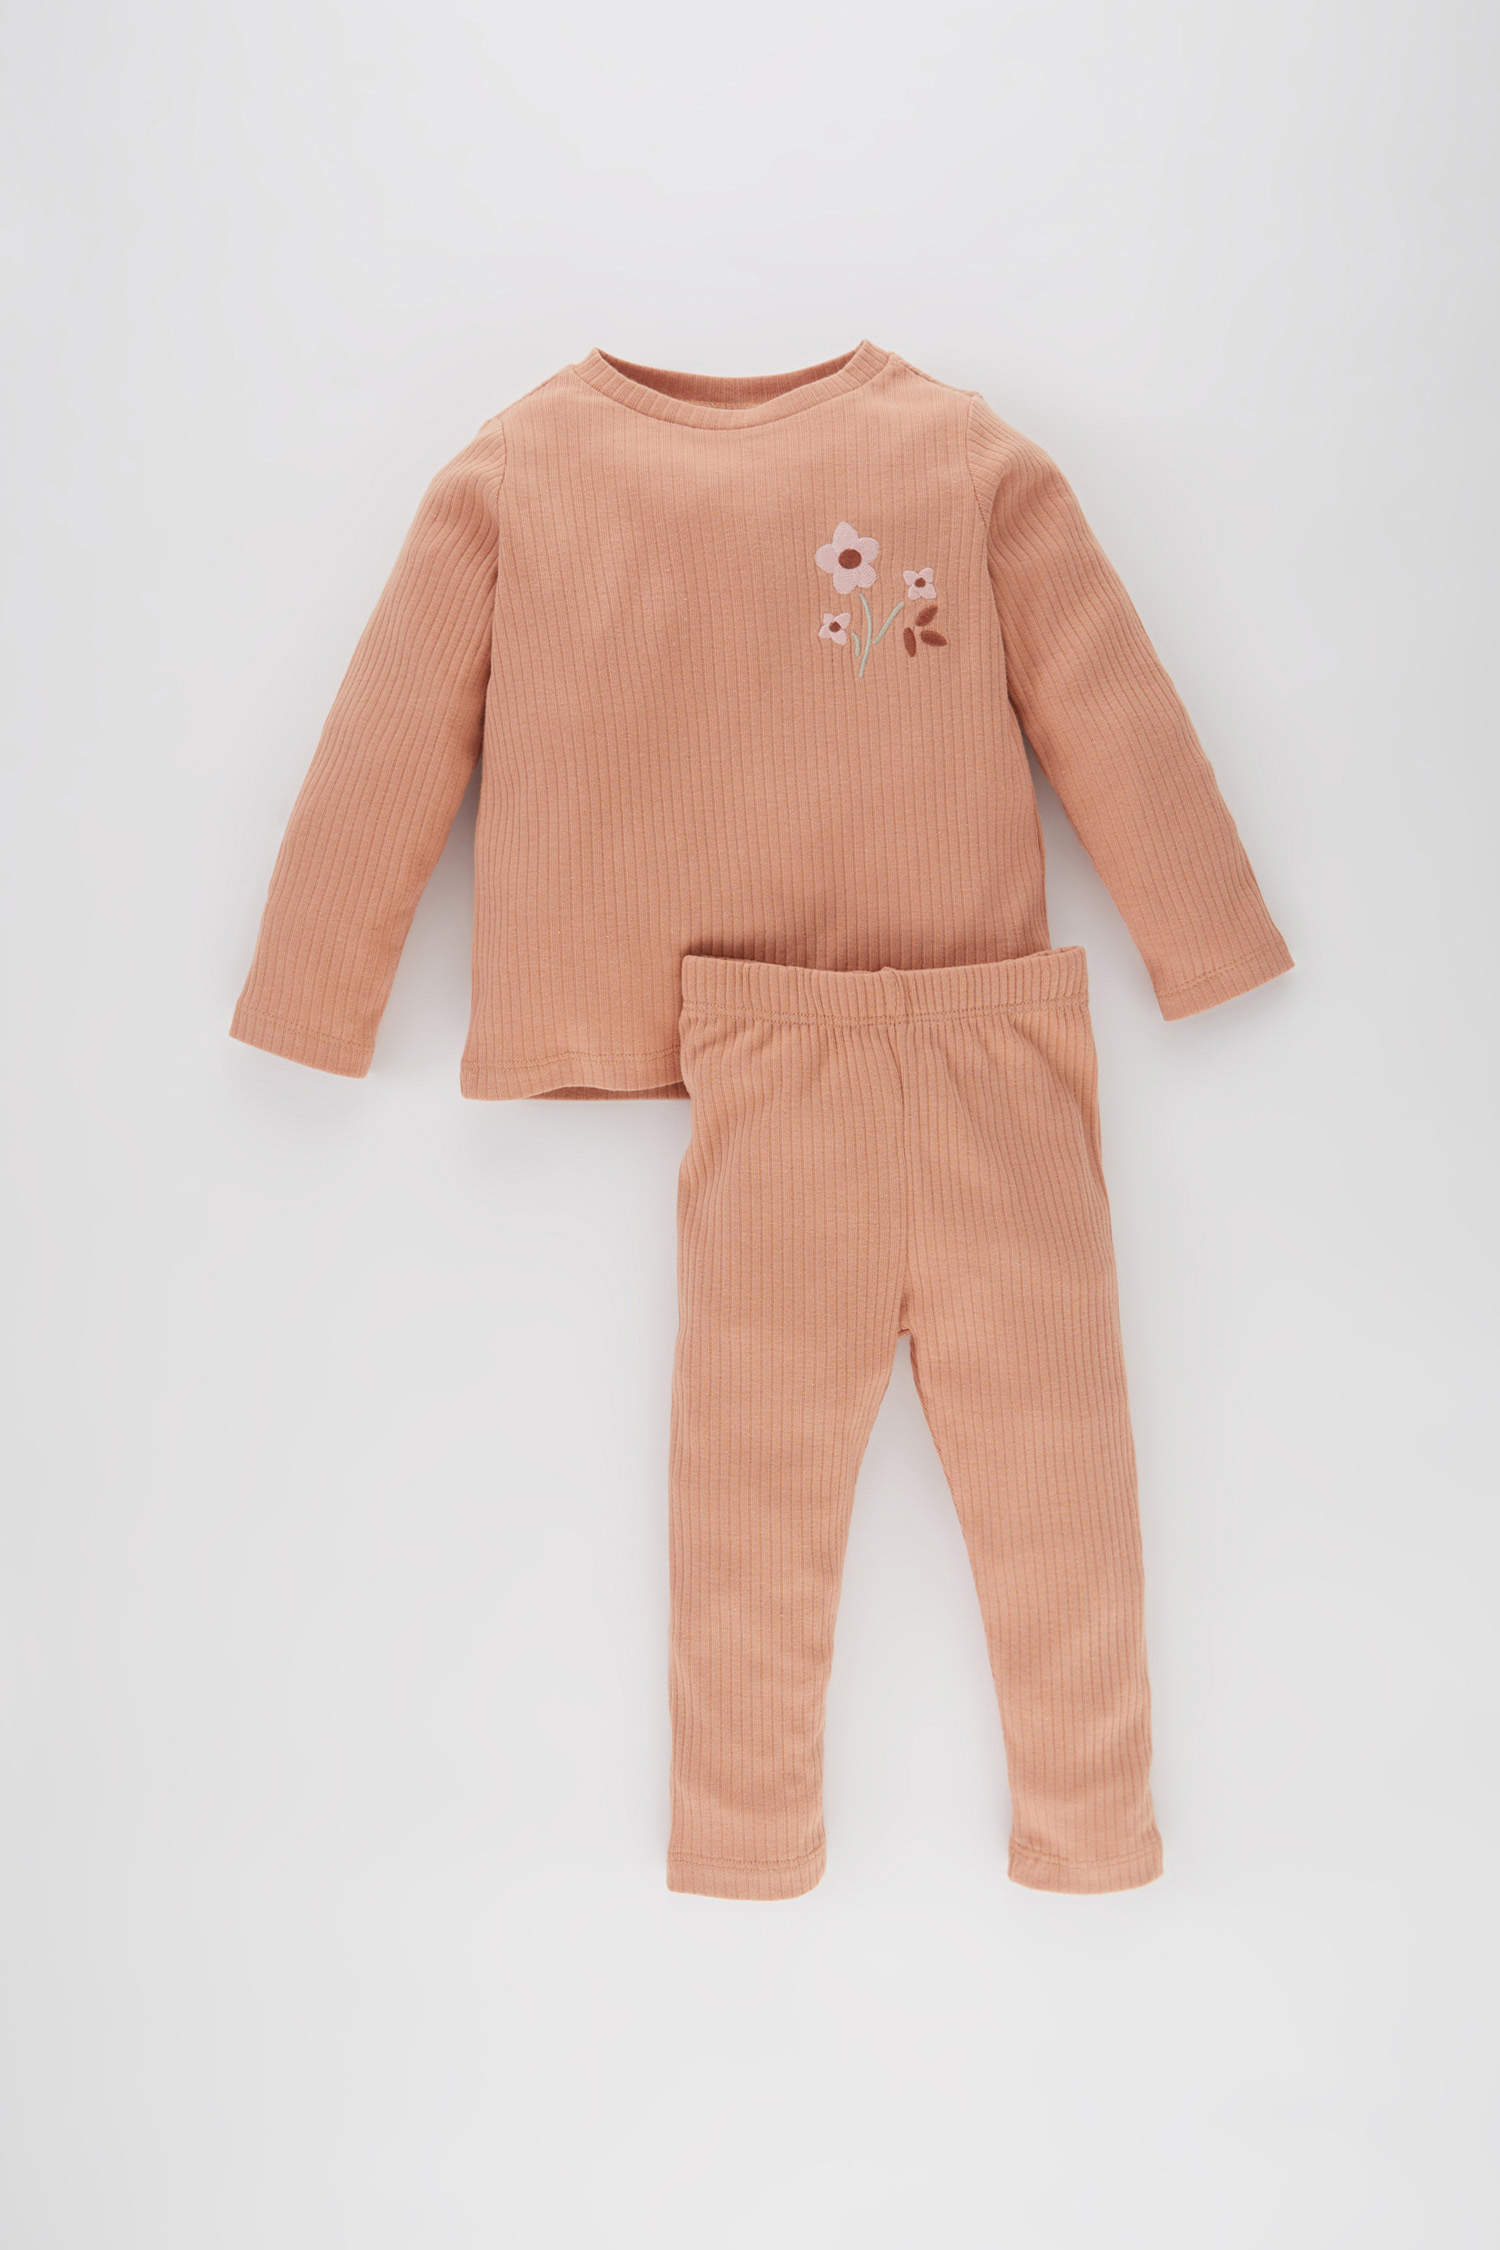 Brown BABY GIRL 2 piece Regular Fit Crew Neck Embroidered Knitted ...